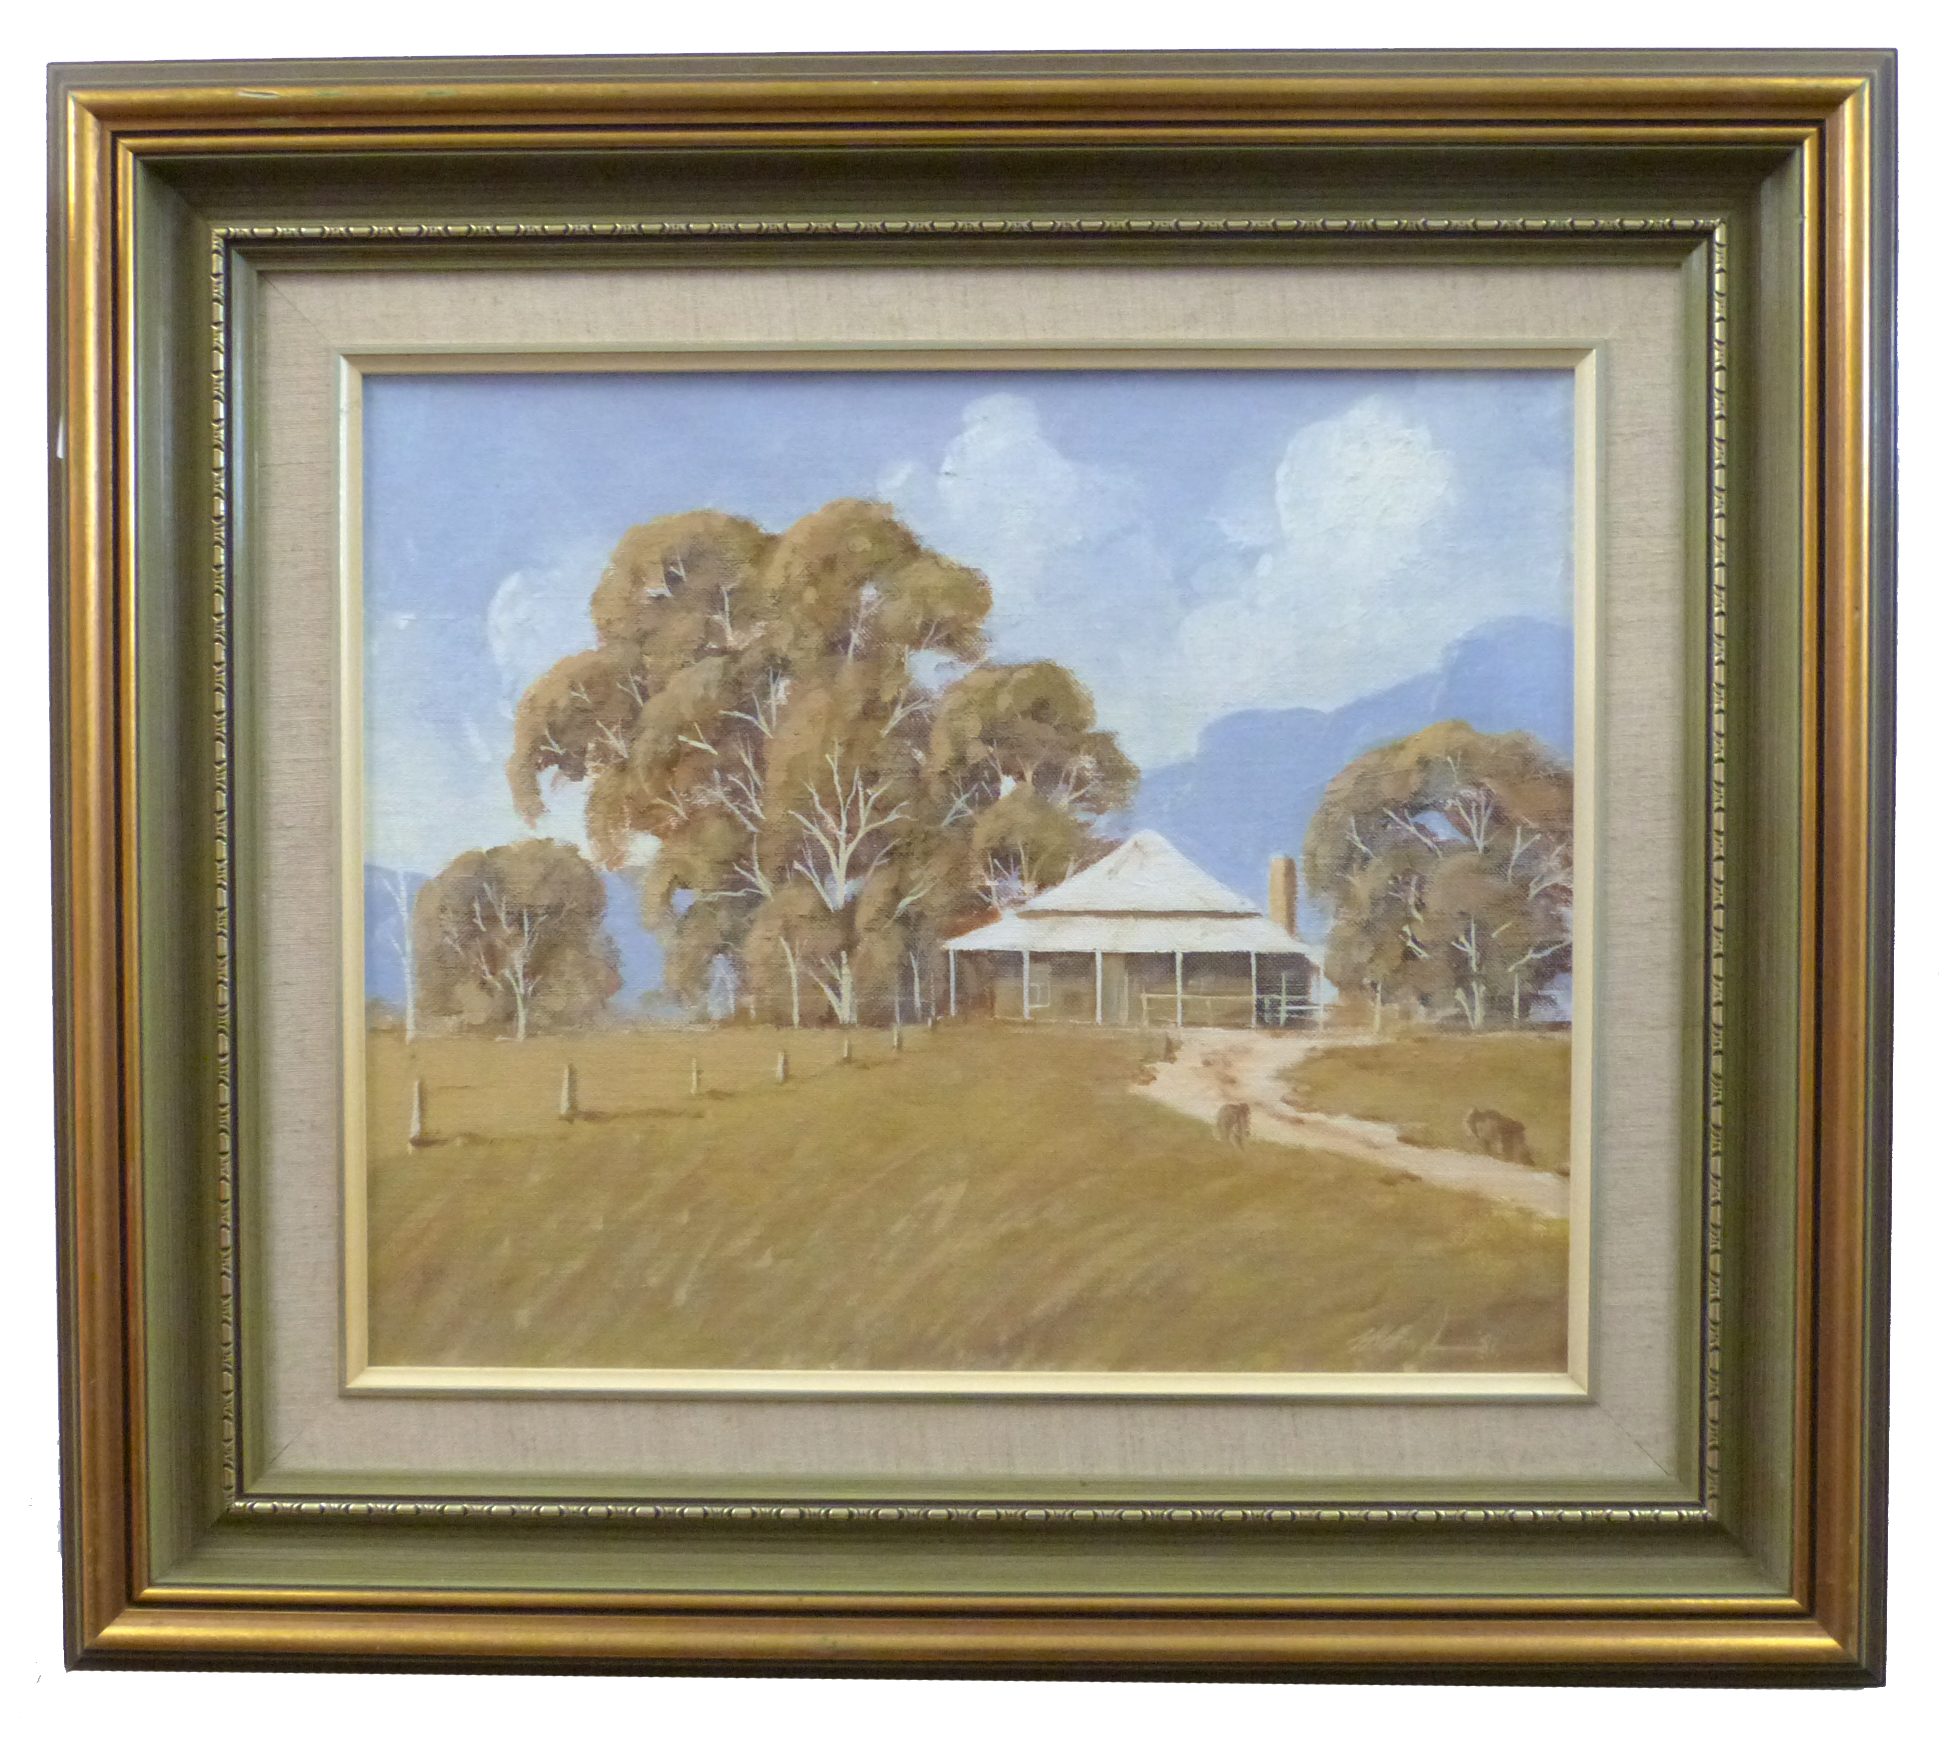 John Barry Haslam, "Near Melinga NSW", oil on board, signed and dated 81 lower right, 36 x 44cm